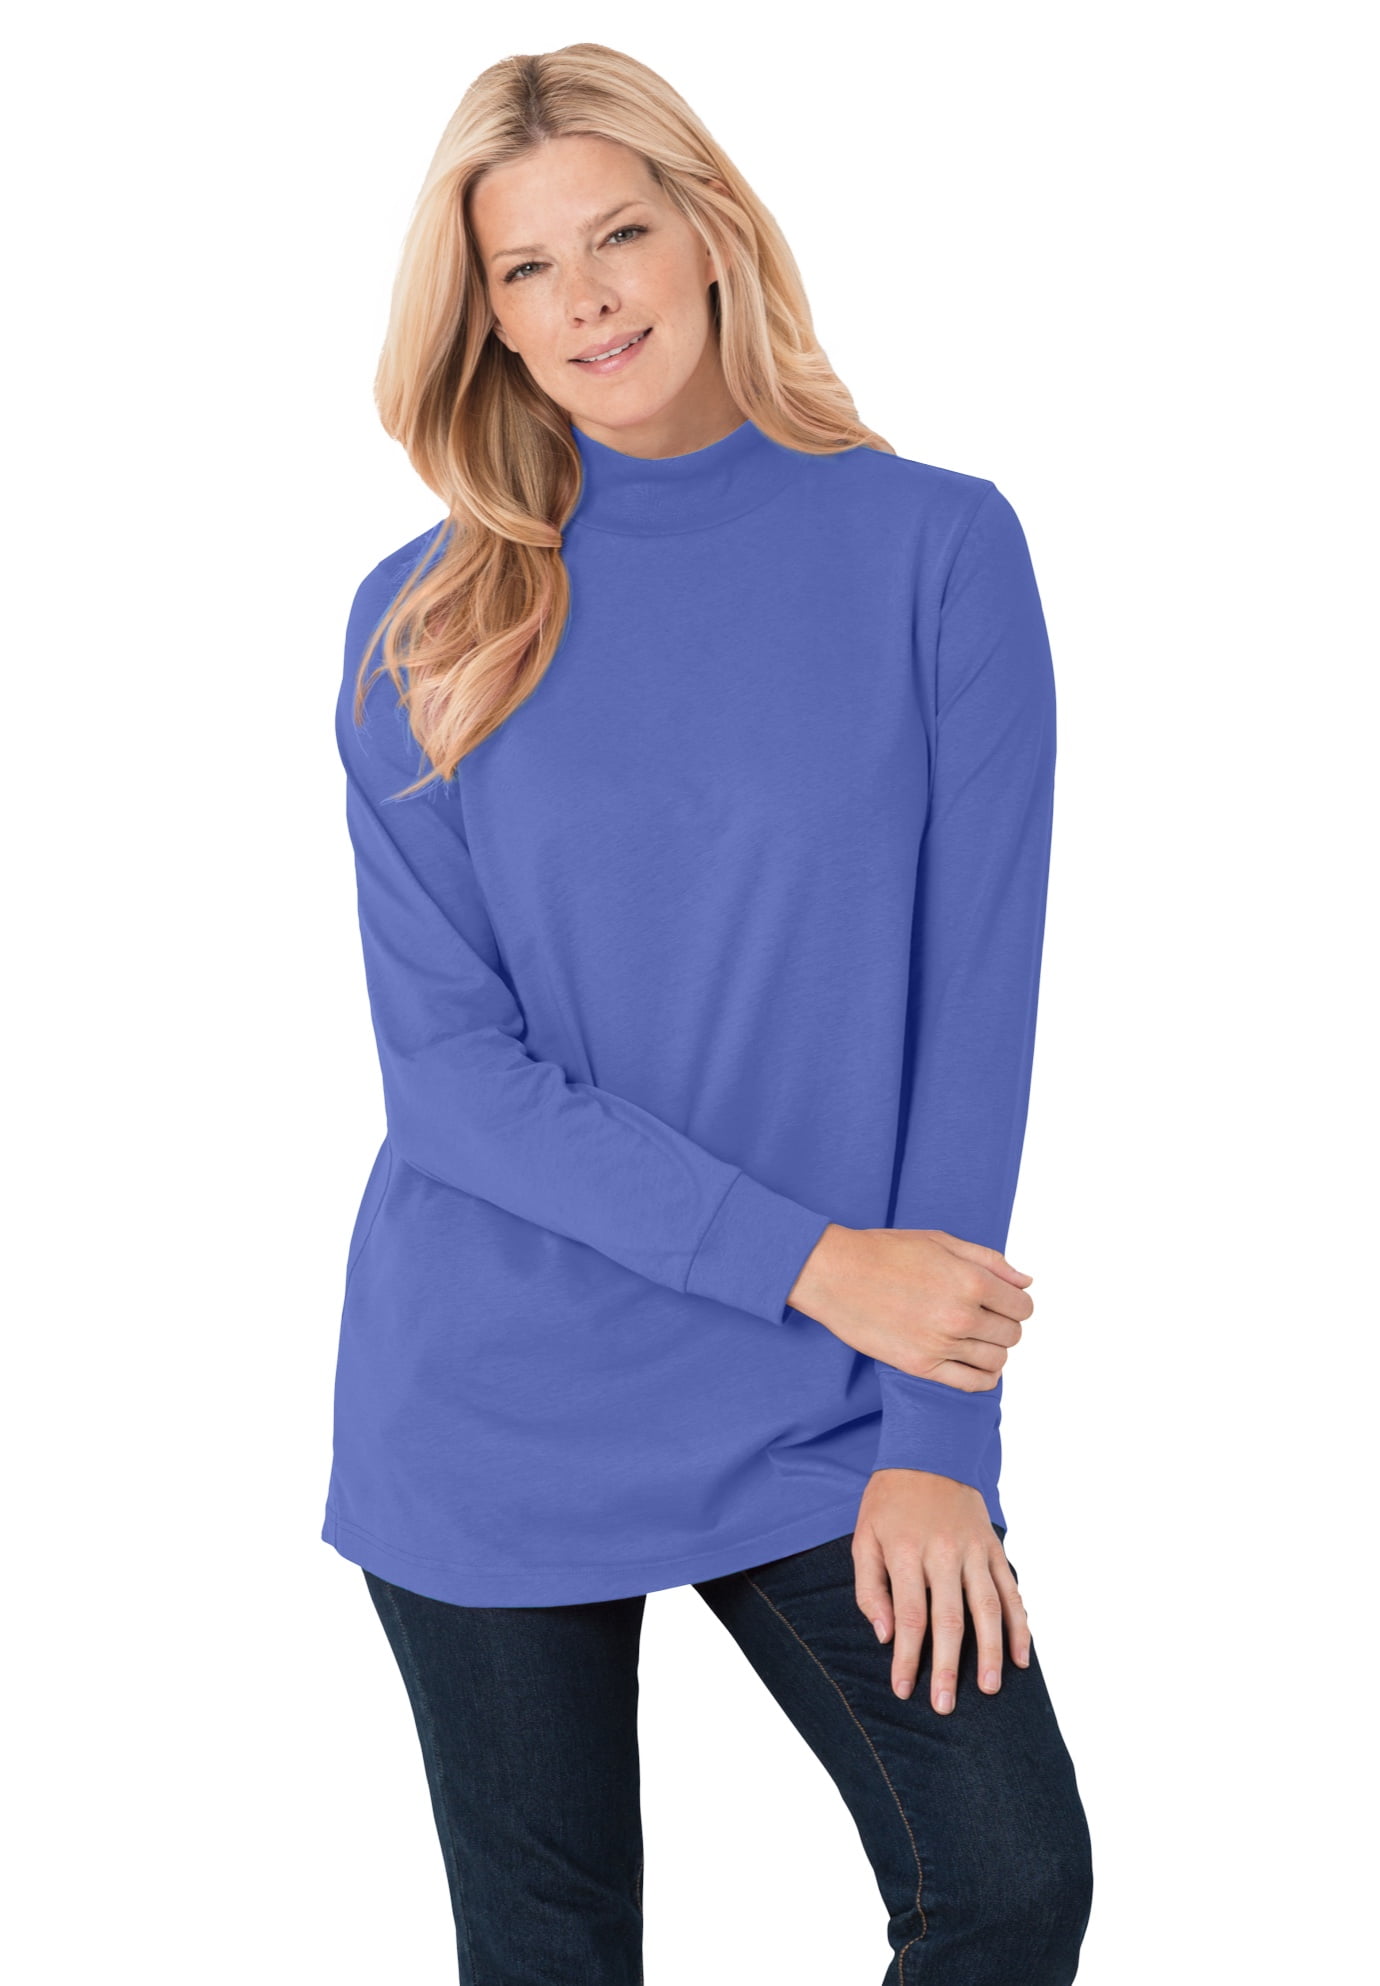 Woman Within - Woman Within Women's Plus Size Perfect Long-Sleeve Mock ...